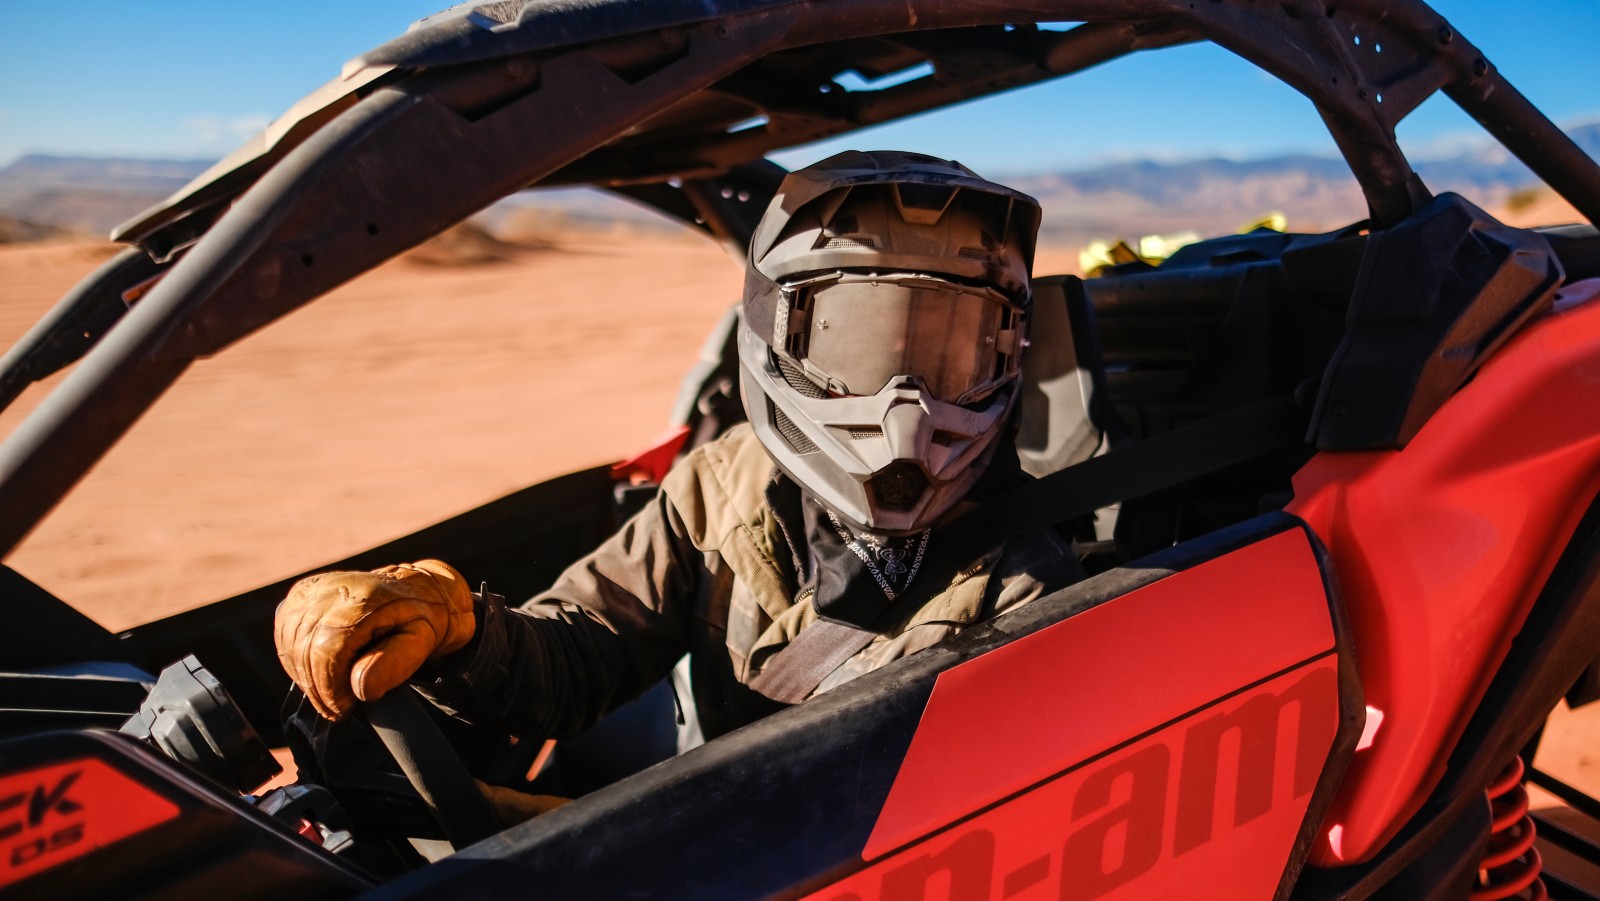 A rider in their Can-Am SxS vehicle